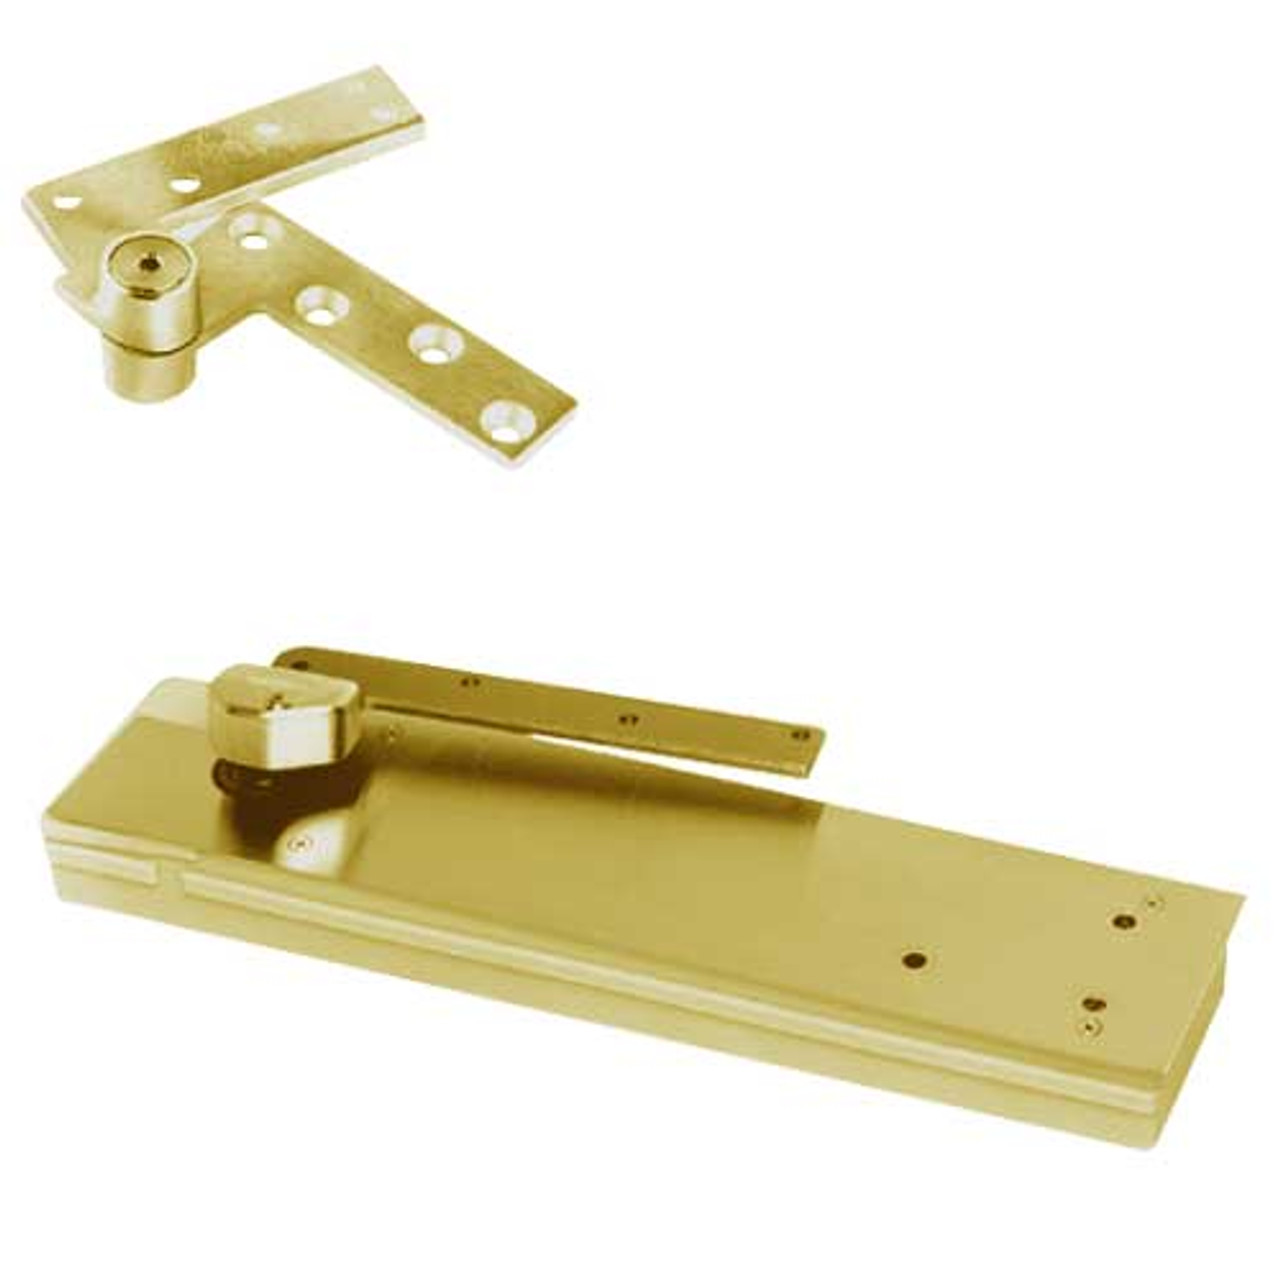 5103ABC105-1-1/2OS-LH-606 Rixson 51 Series 1-1/2" Offset Hung Shallow Depth Floor Closers in Satin Brass Finish